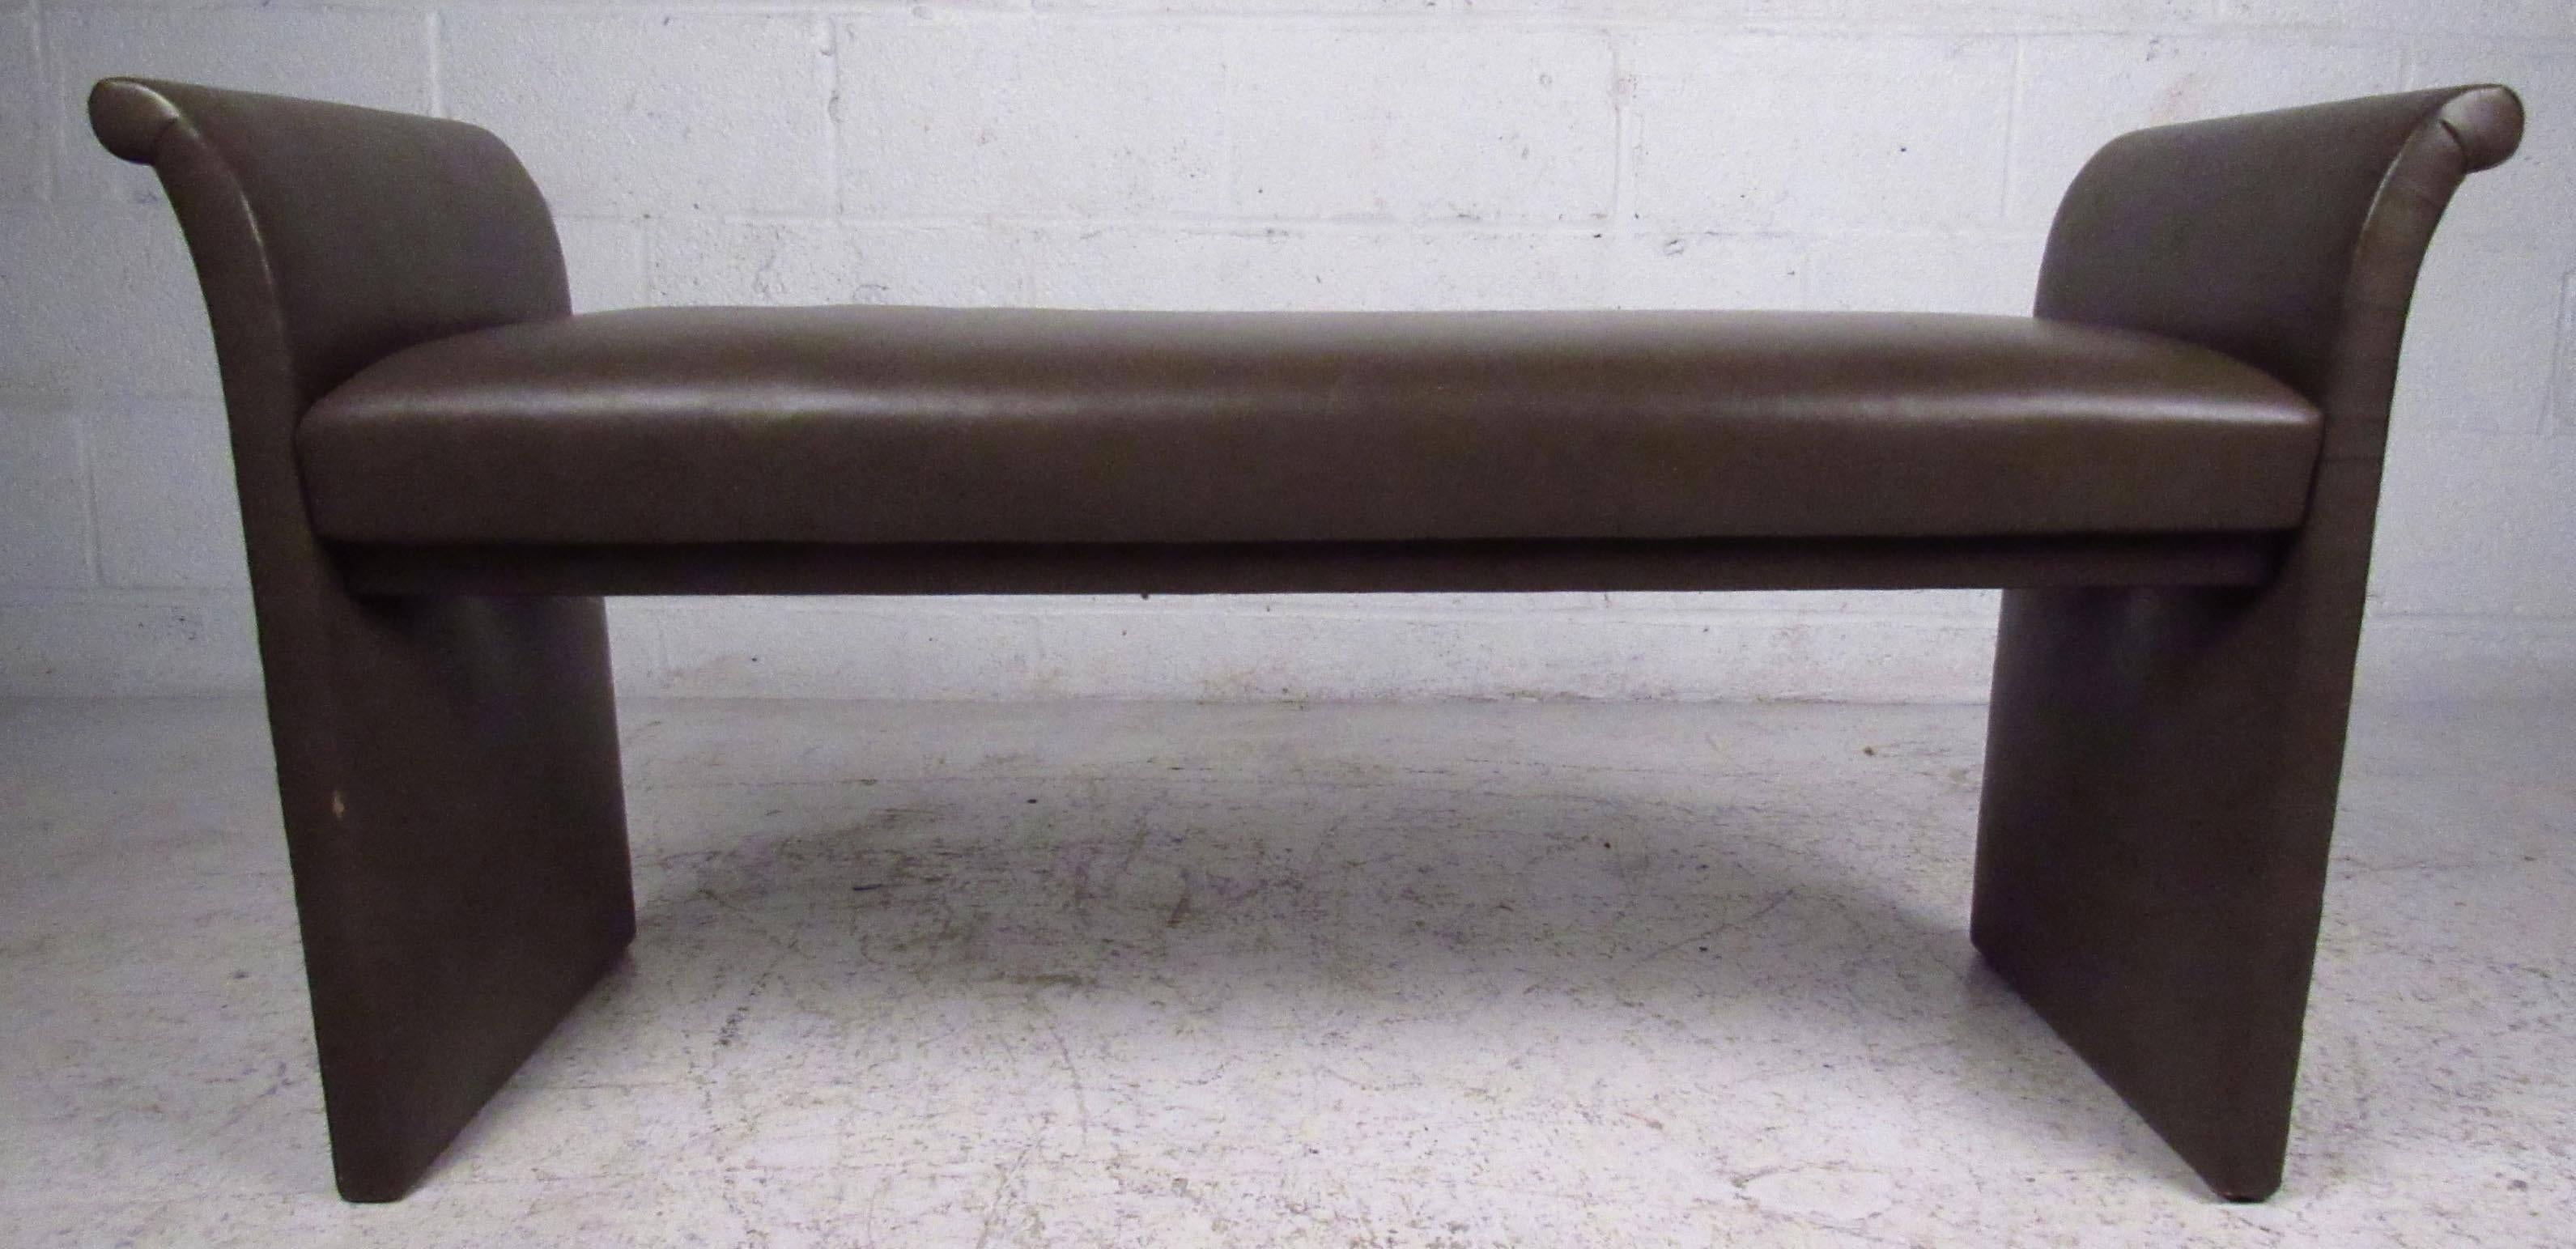 Vintage-modern window bench features sculpted sides and vinyl upholstery, making a stylish yet useful seating option for bedroom, changing room, or business. 

Please confirm item location NY or NJ with dealer.